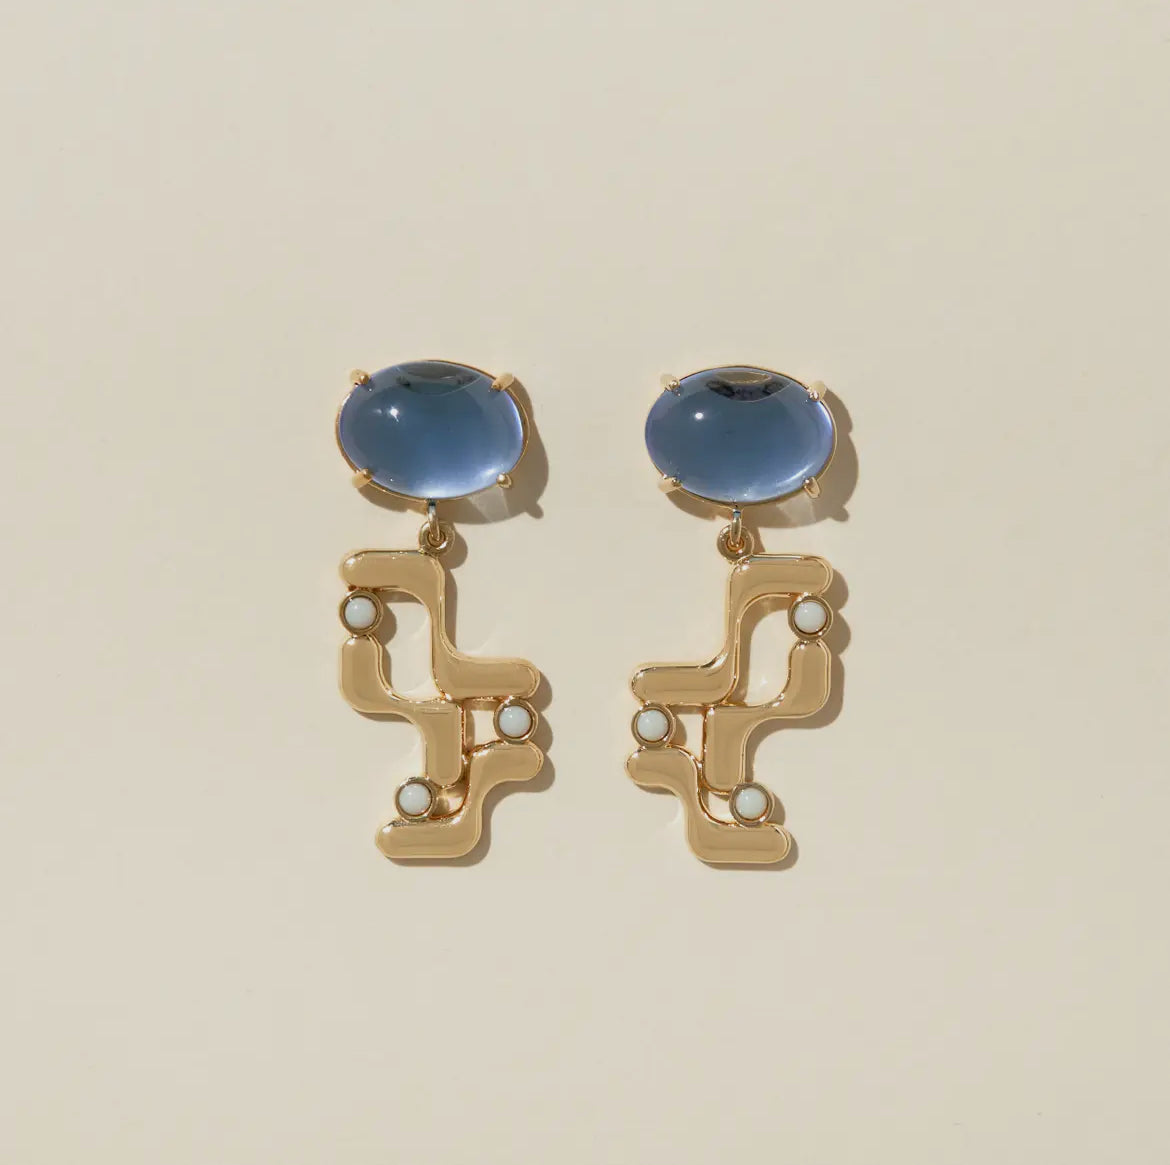 The Halsted Earrings - Blue